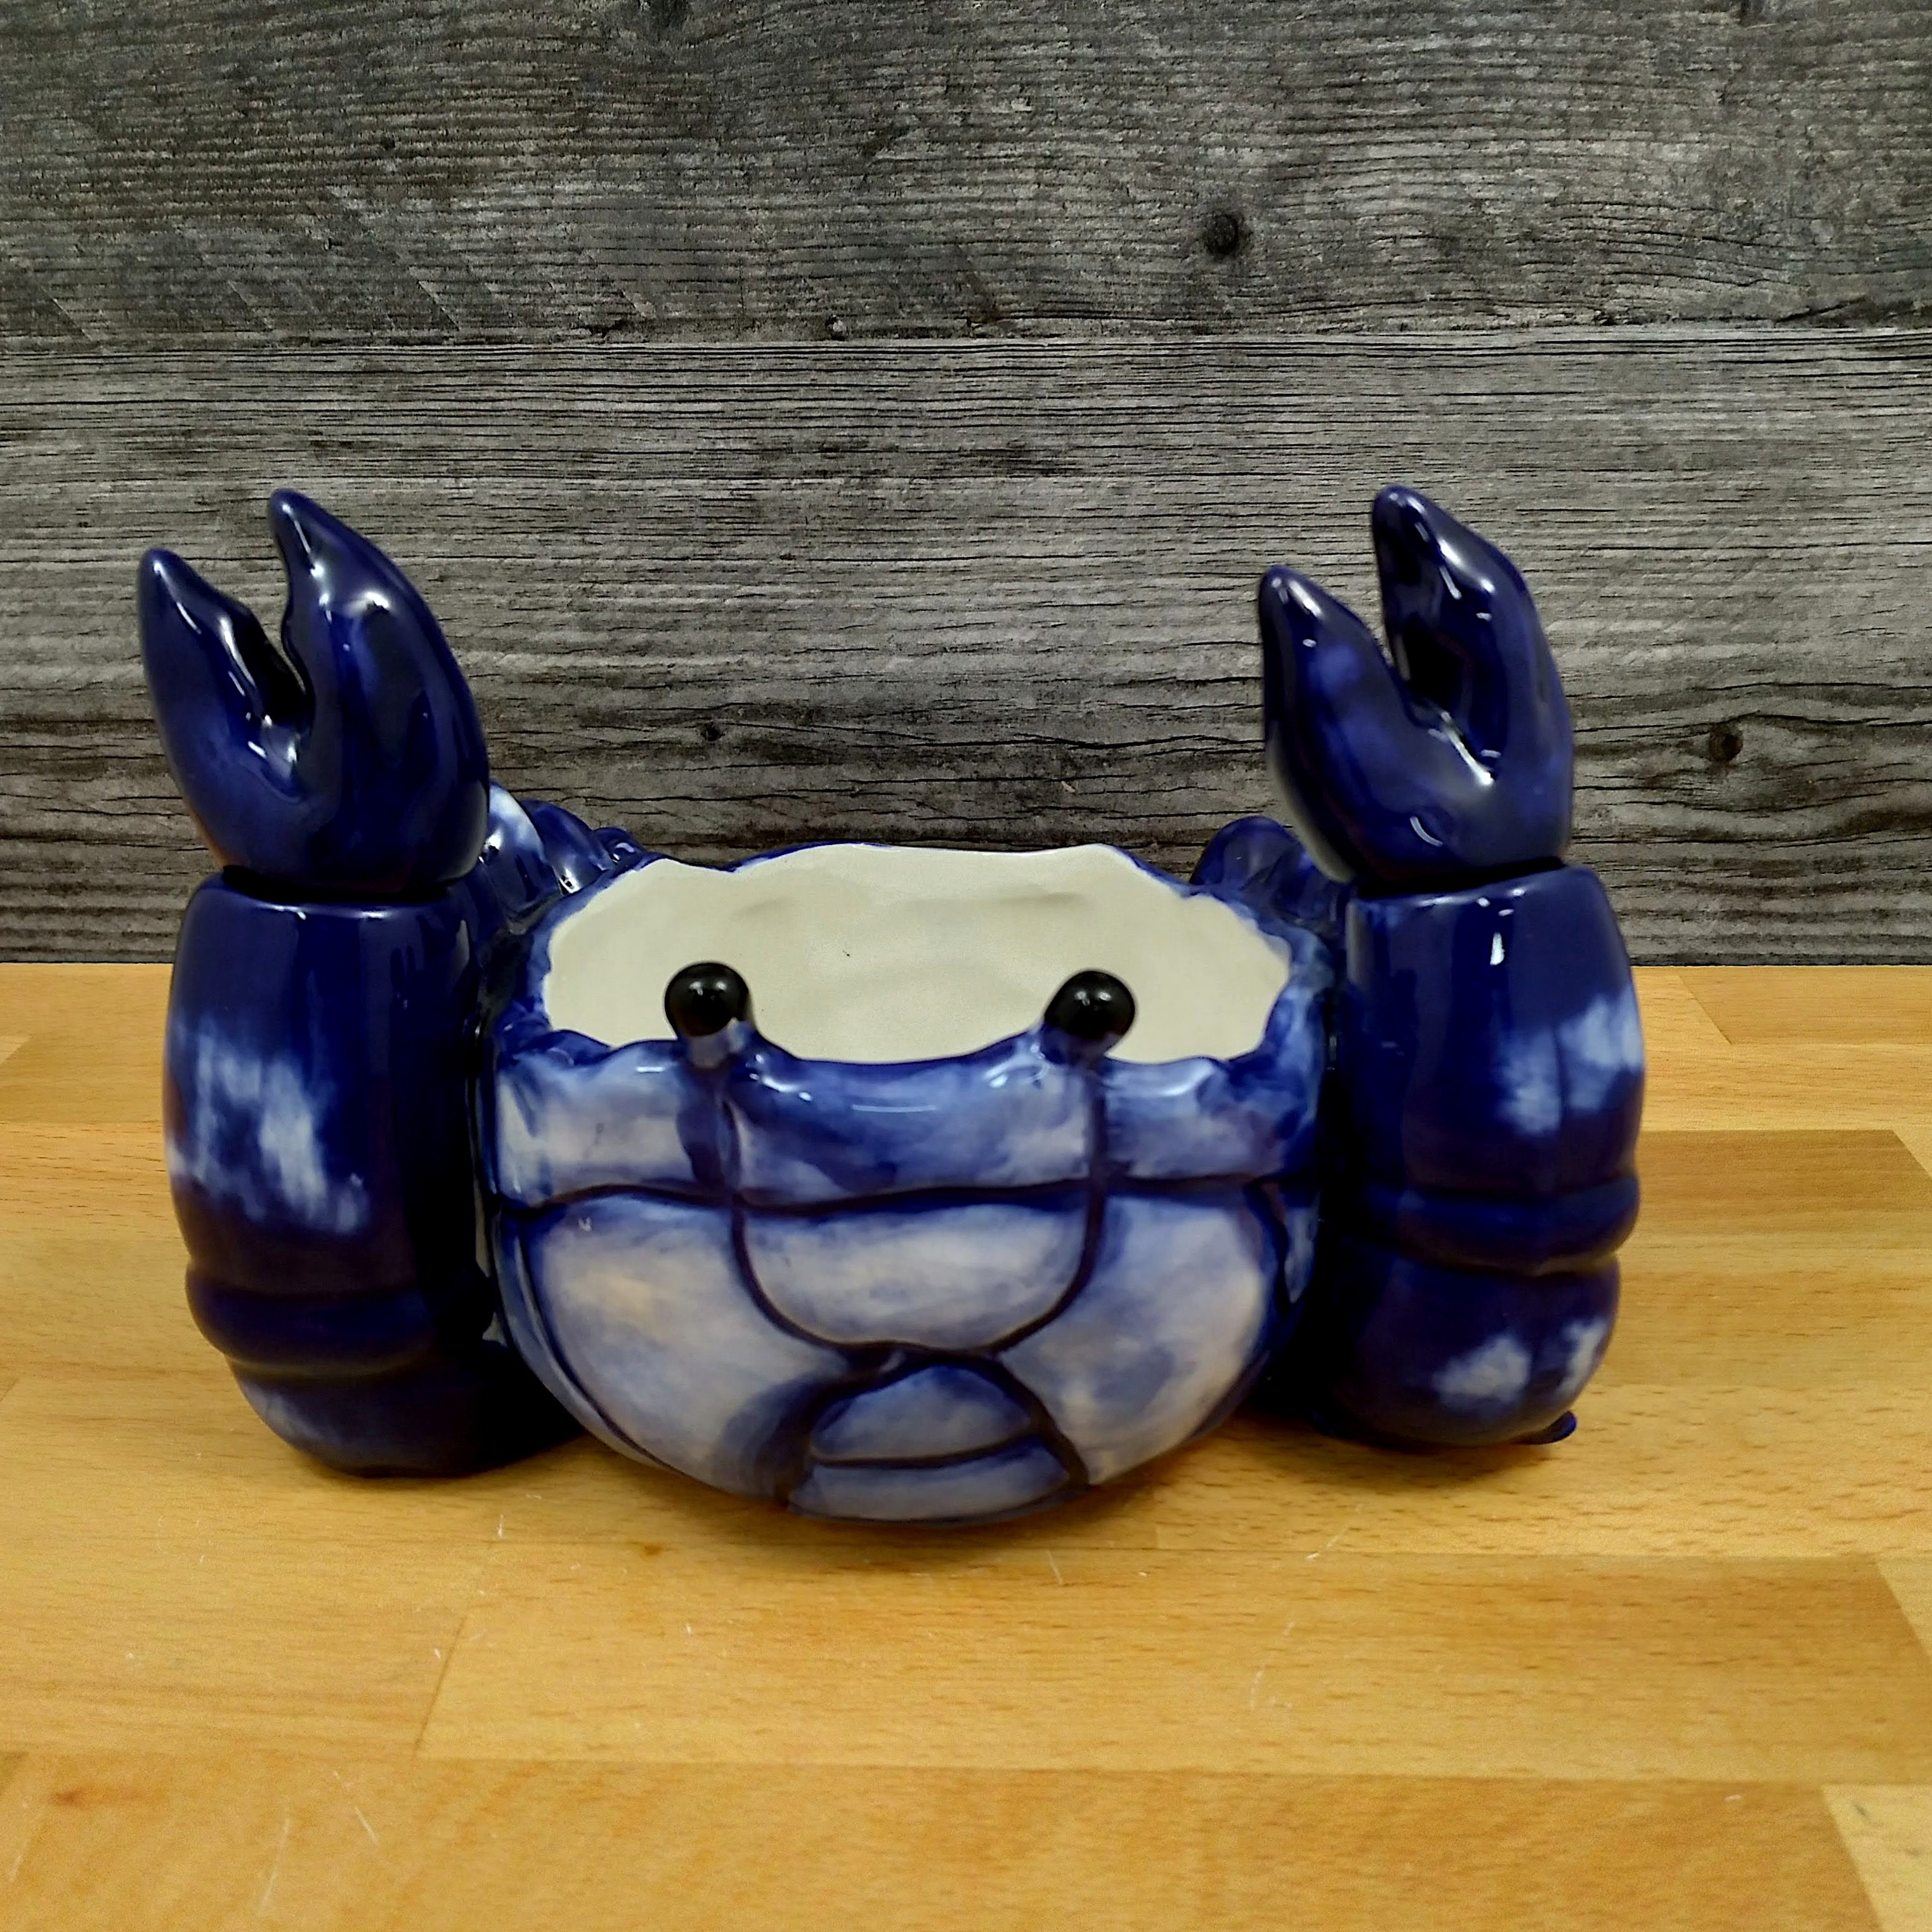 This Crab Butter Bowl Dip Server with Spreader by Blue Sky and Heather Goldminc is made with love by Premier Homegoods! Shop more unique gift ideas today with Spots Initiatives, the best way to support creators.